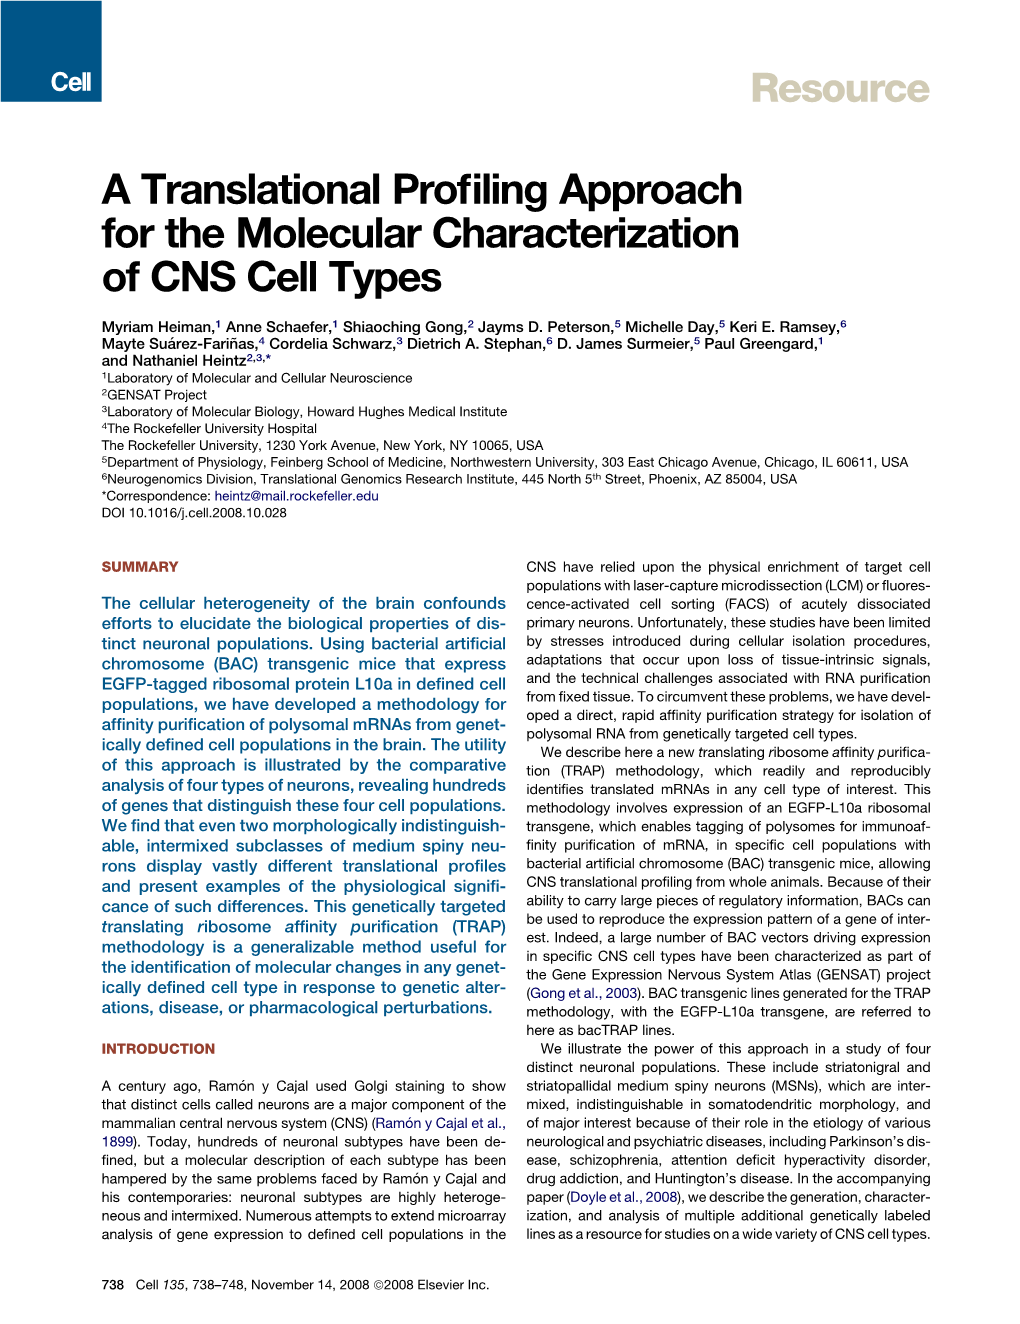 A Translational Profiling Approach for the Molecular Characterization Of